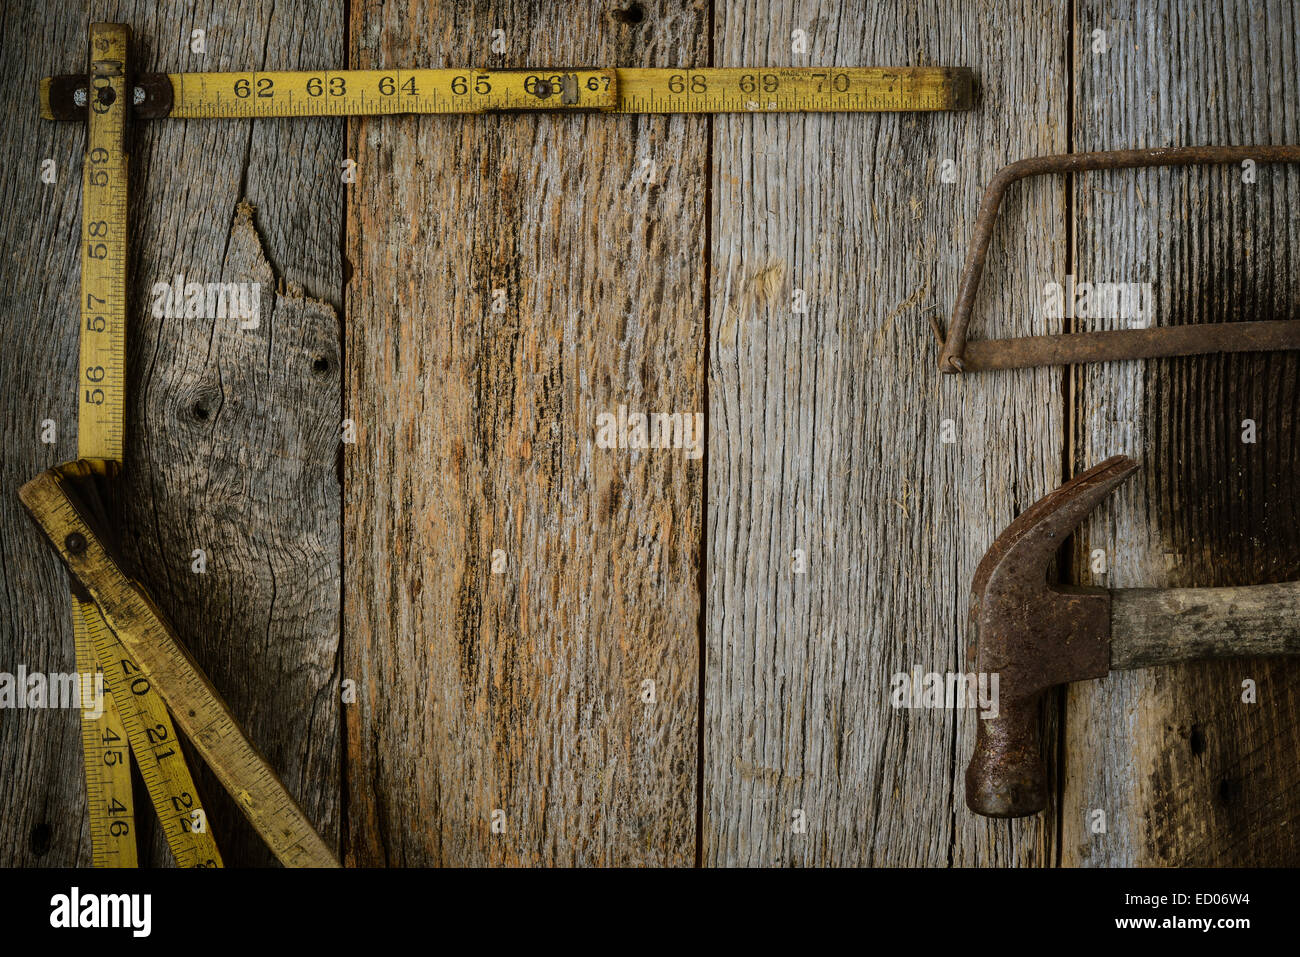 Measuring Tape Hammer and Saw on Rustic Old Wood Background Stock Photo